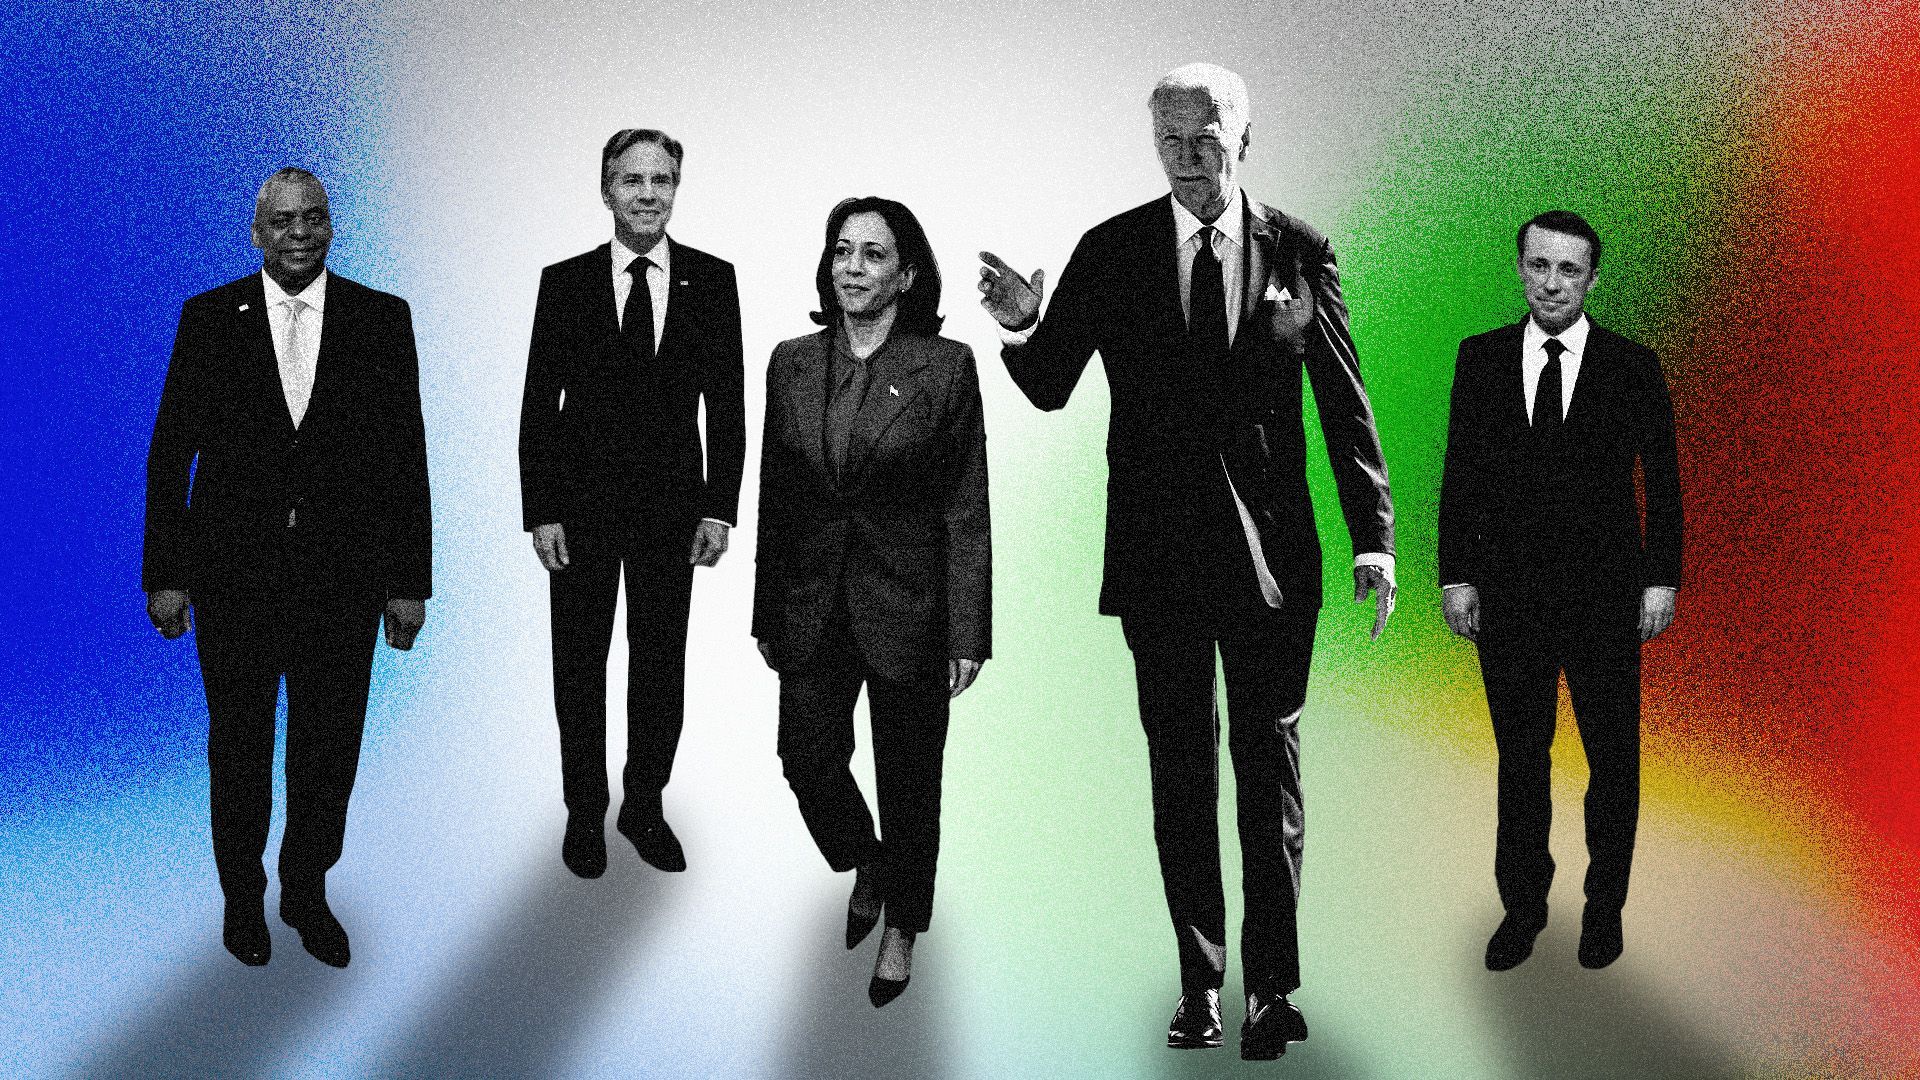 Photo illustration of Lloyd Austin, Tony Blinken, Kamala Harris, President Biden, and Jake Sullivan in front of a hazy, colorful background with the colors of the Israel and Palestinian flags.